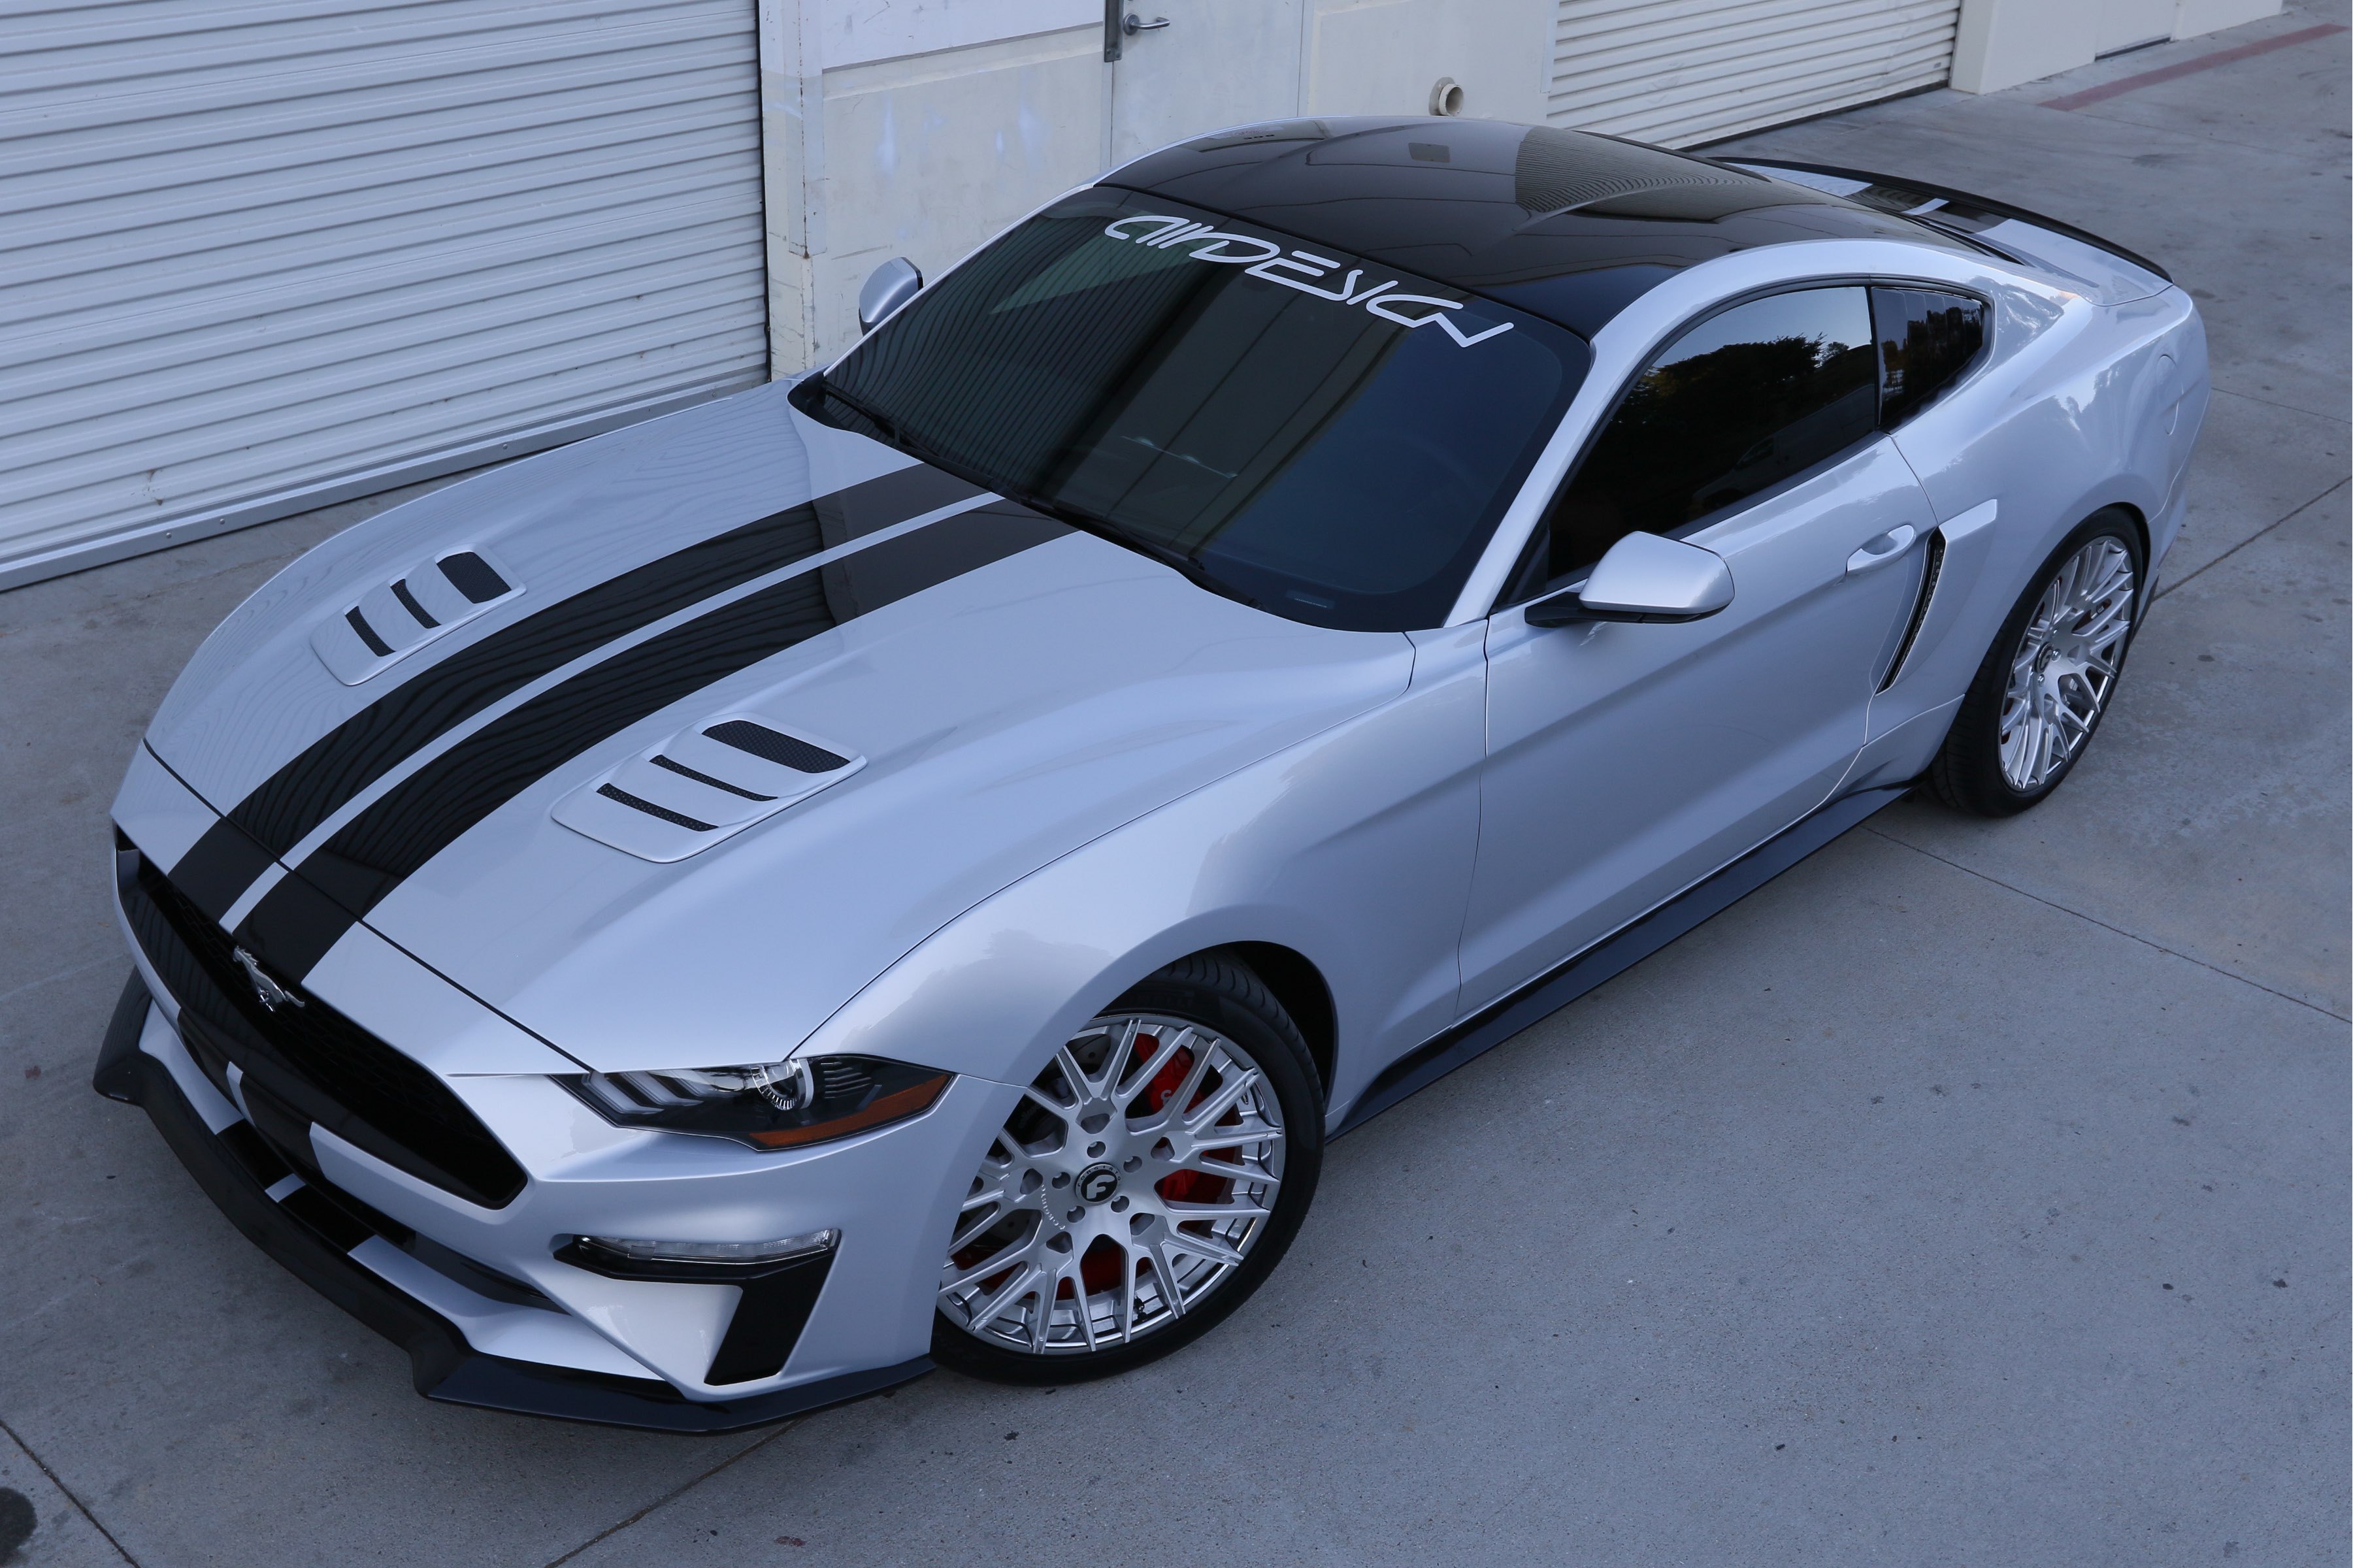 Gray Ford Mustang with Aftermarket Vented Hood - Photo by Air Design USA